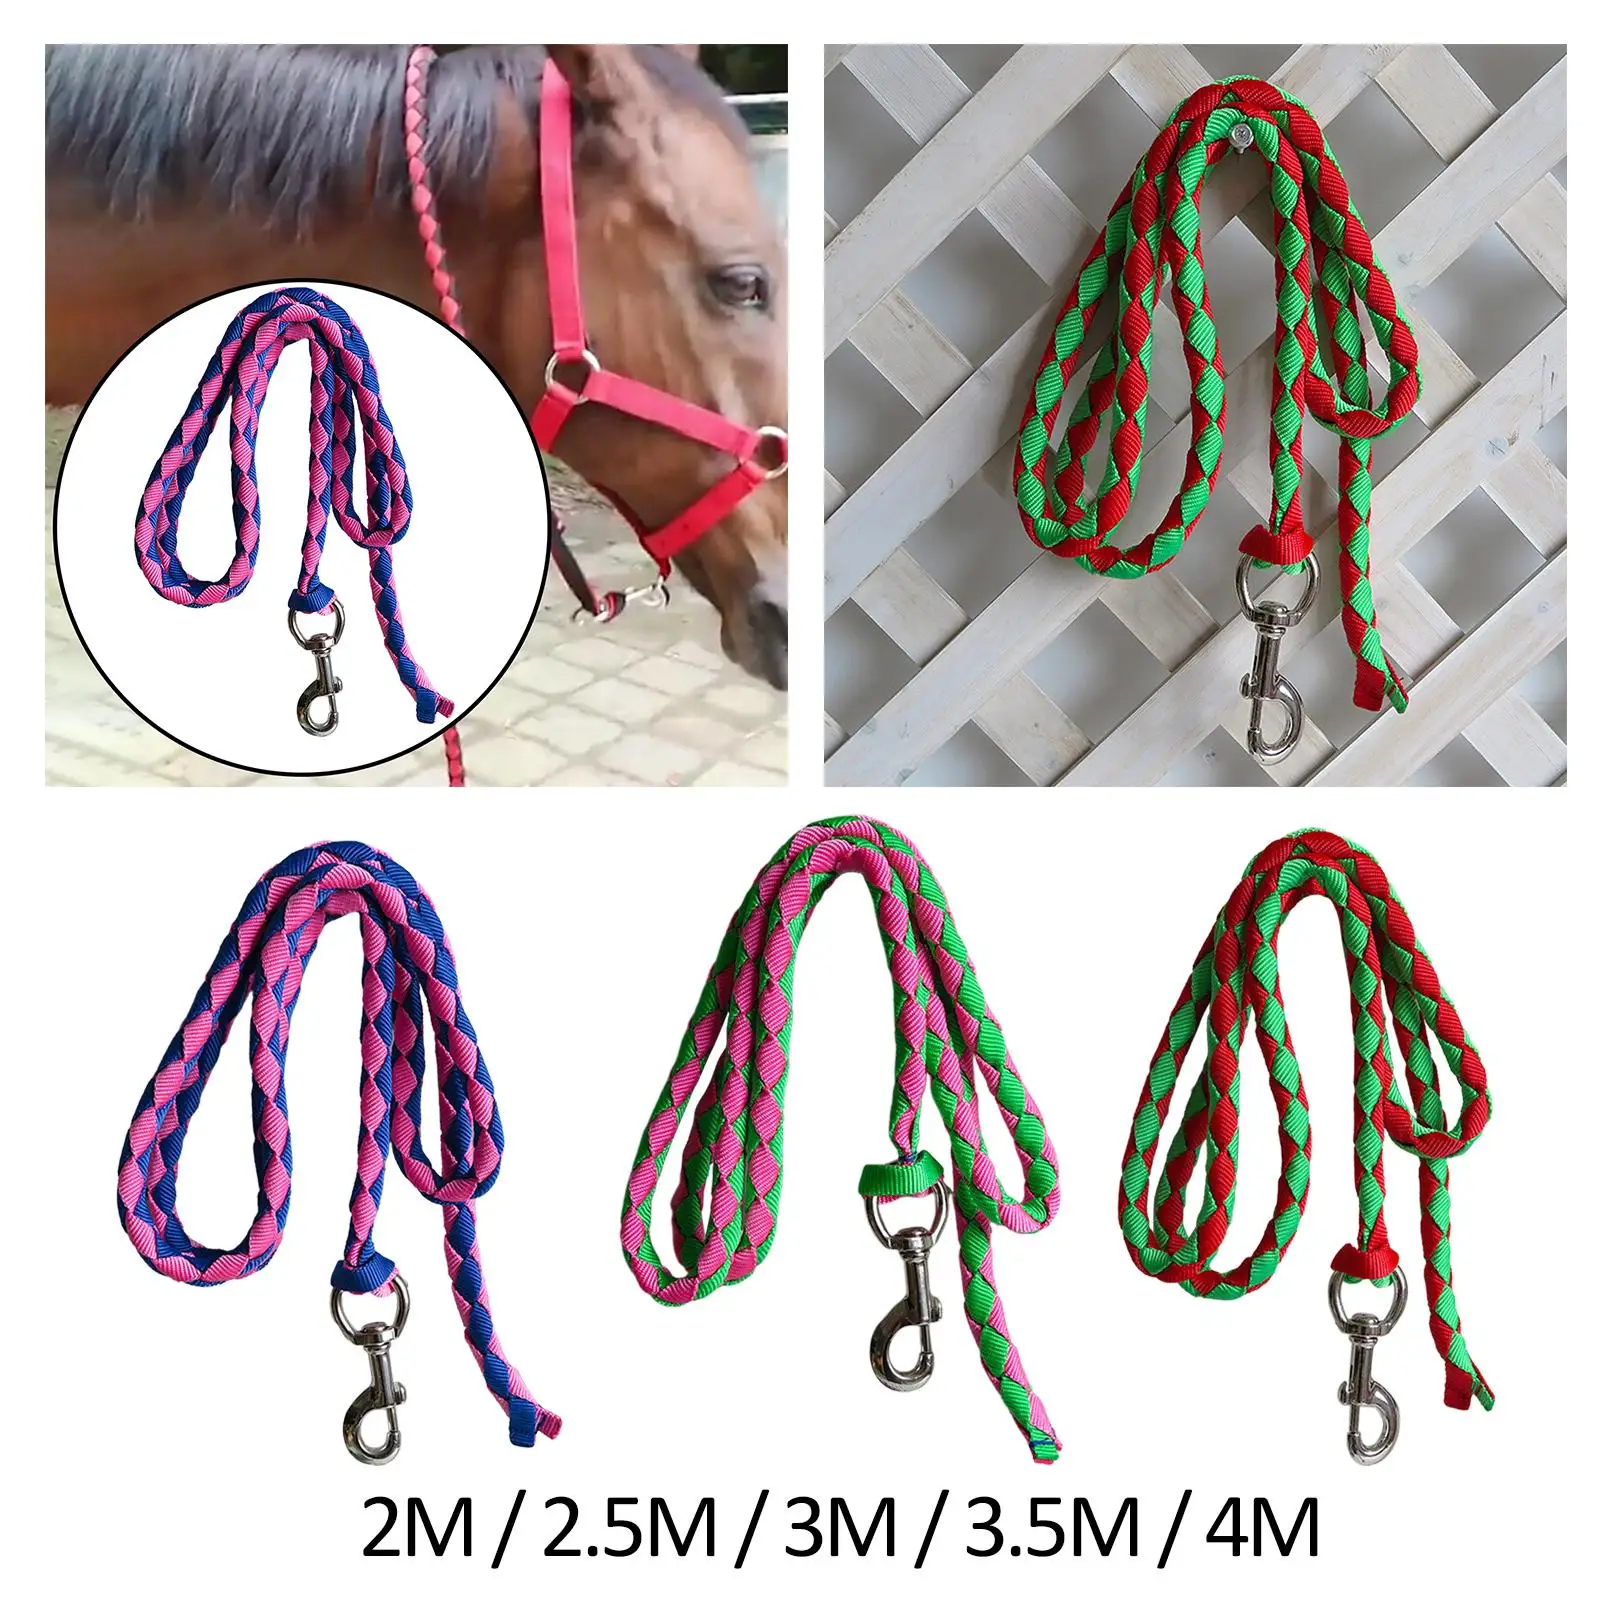 Horse lead rope swivel buckle for farm animals, robust riding lead rope